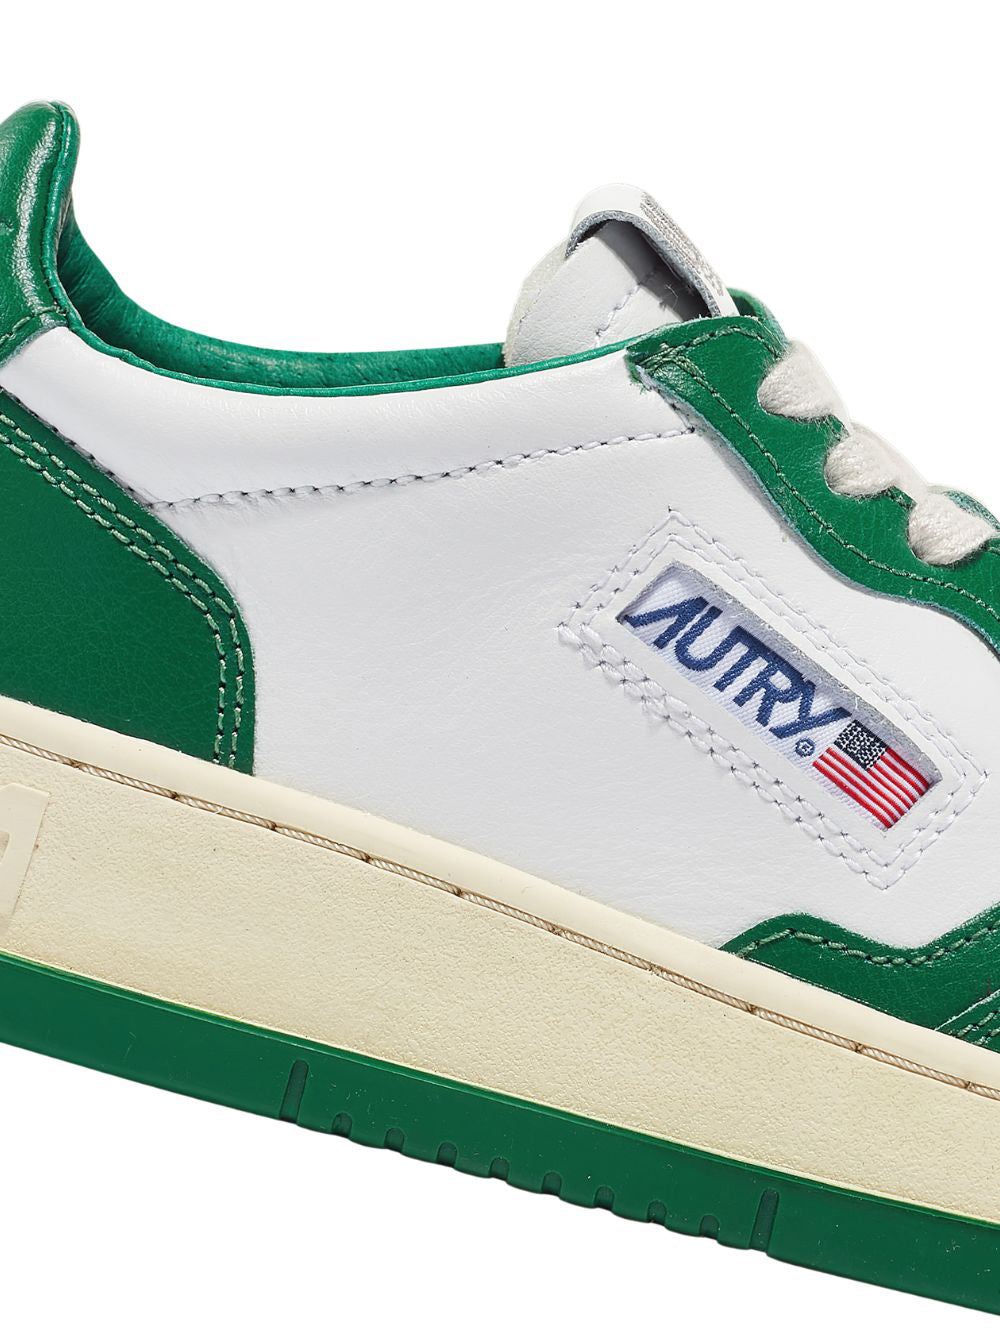 Medalist Low Sneakers In Two-Tone Leather Color (White And Green) (Men)